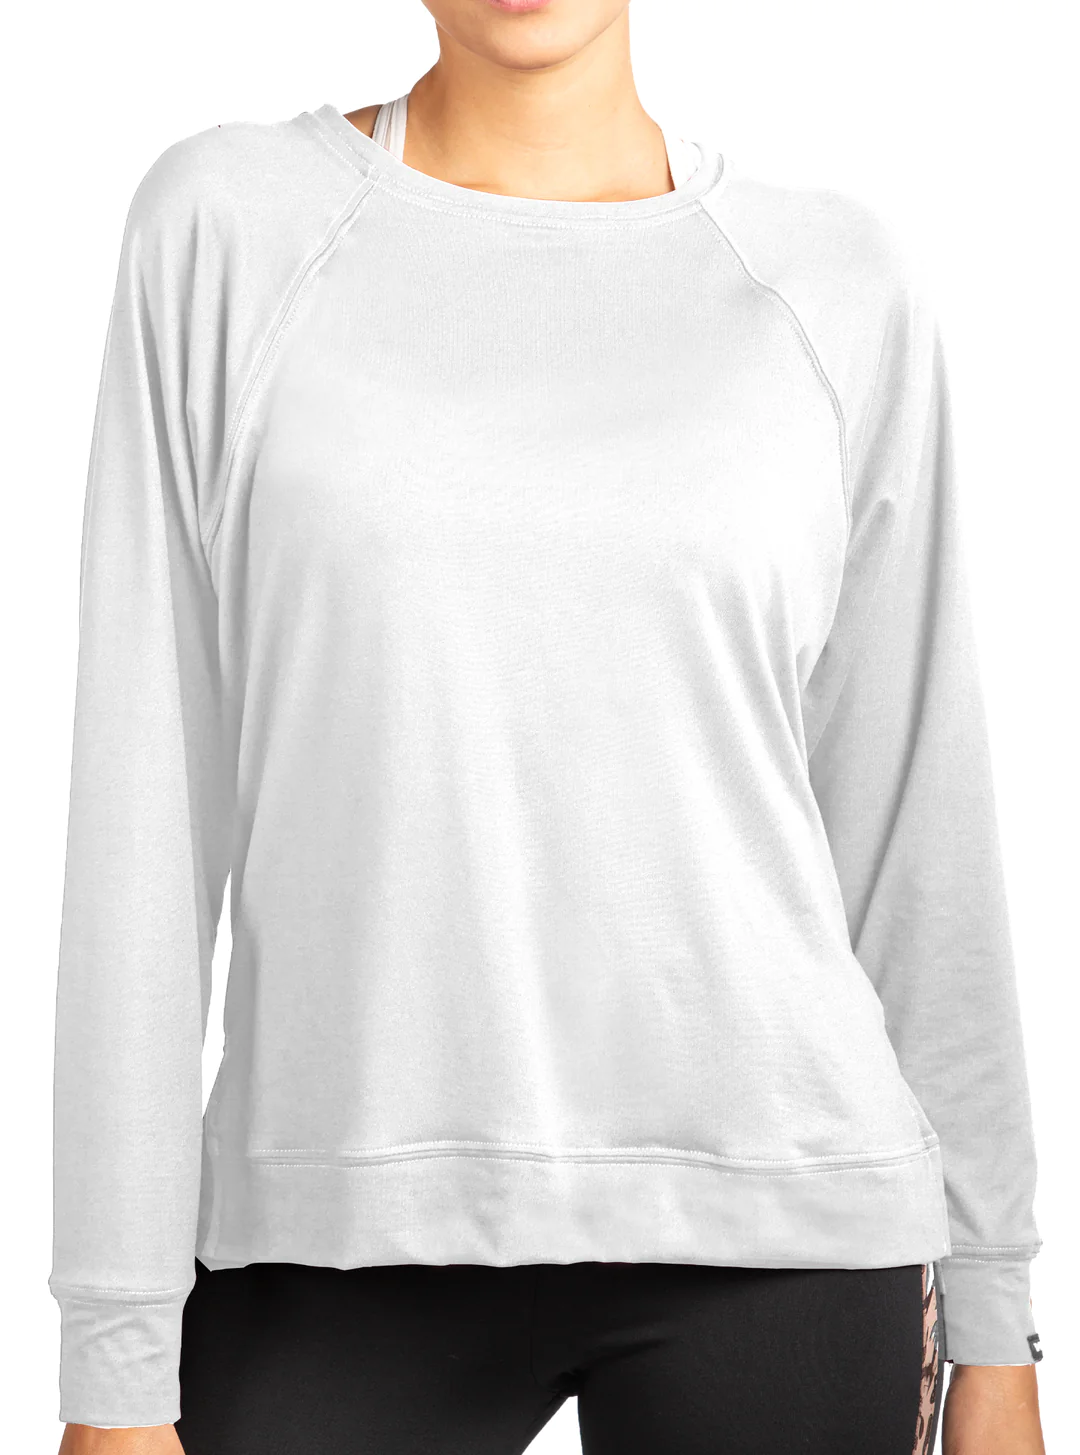 WSI Sports Women's Hyprtech Bamboo Relaxed Fit Long Sleeve